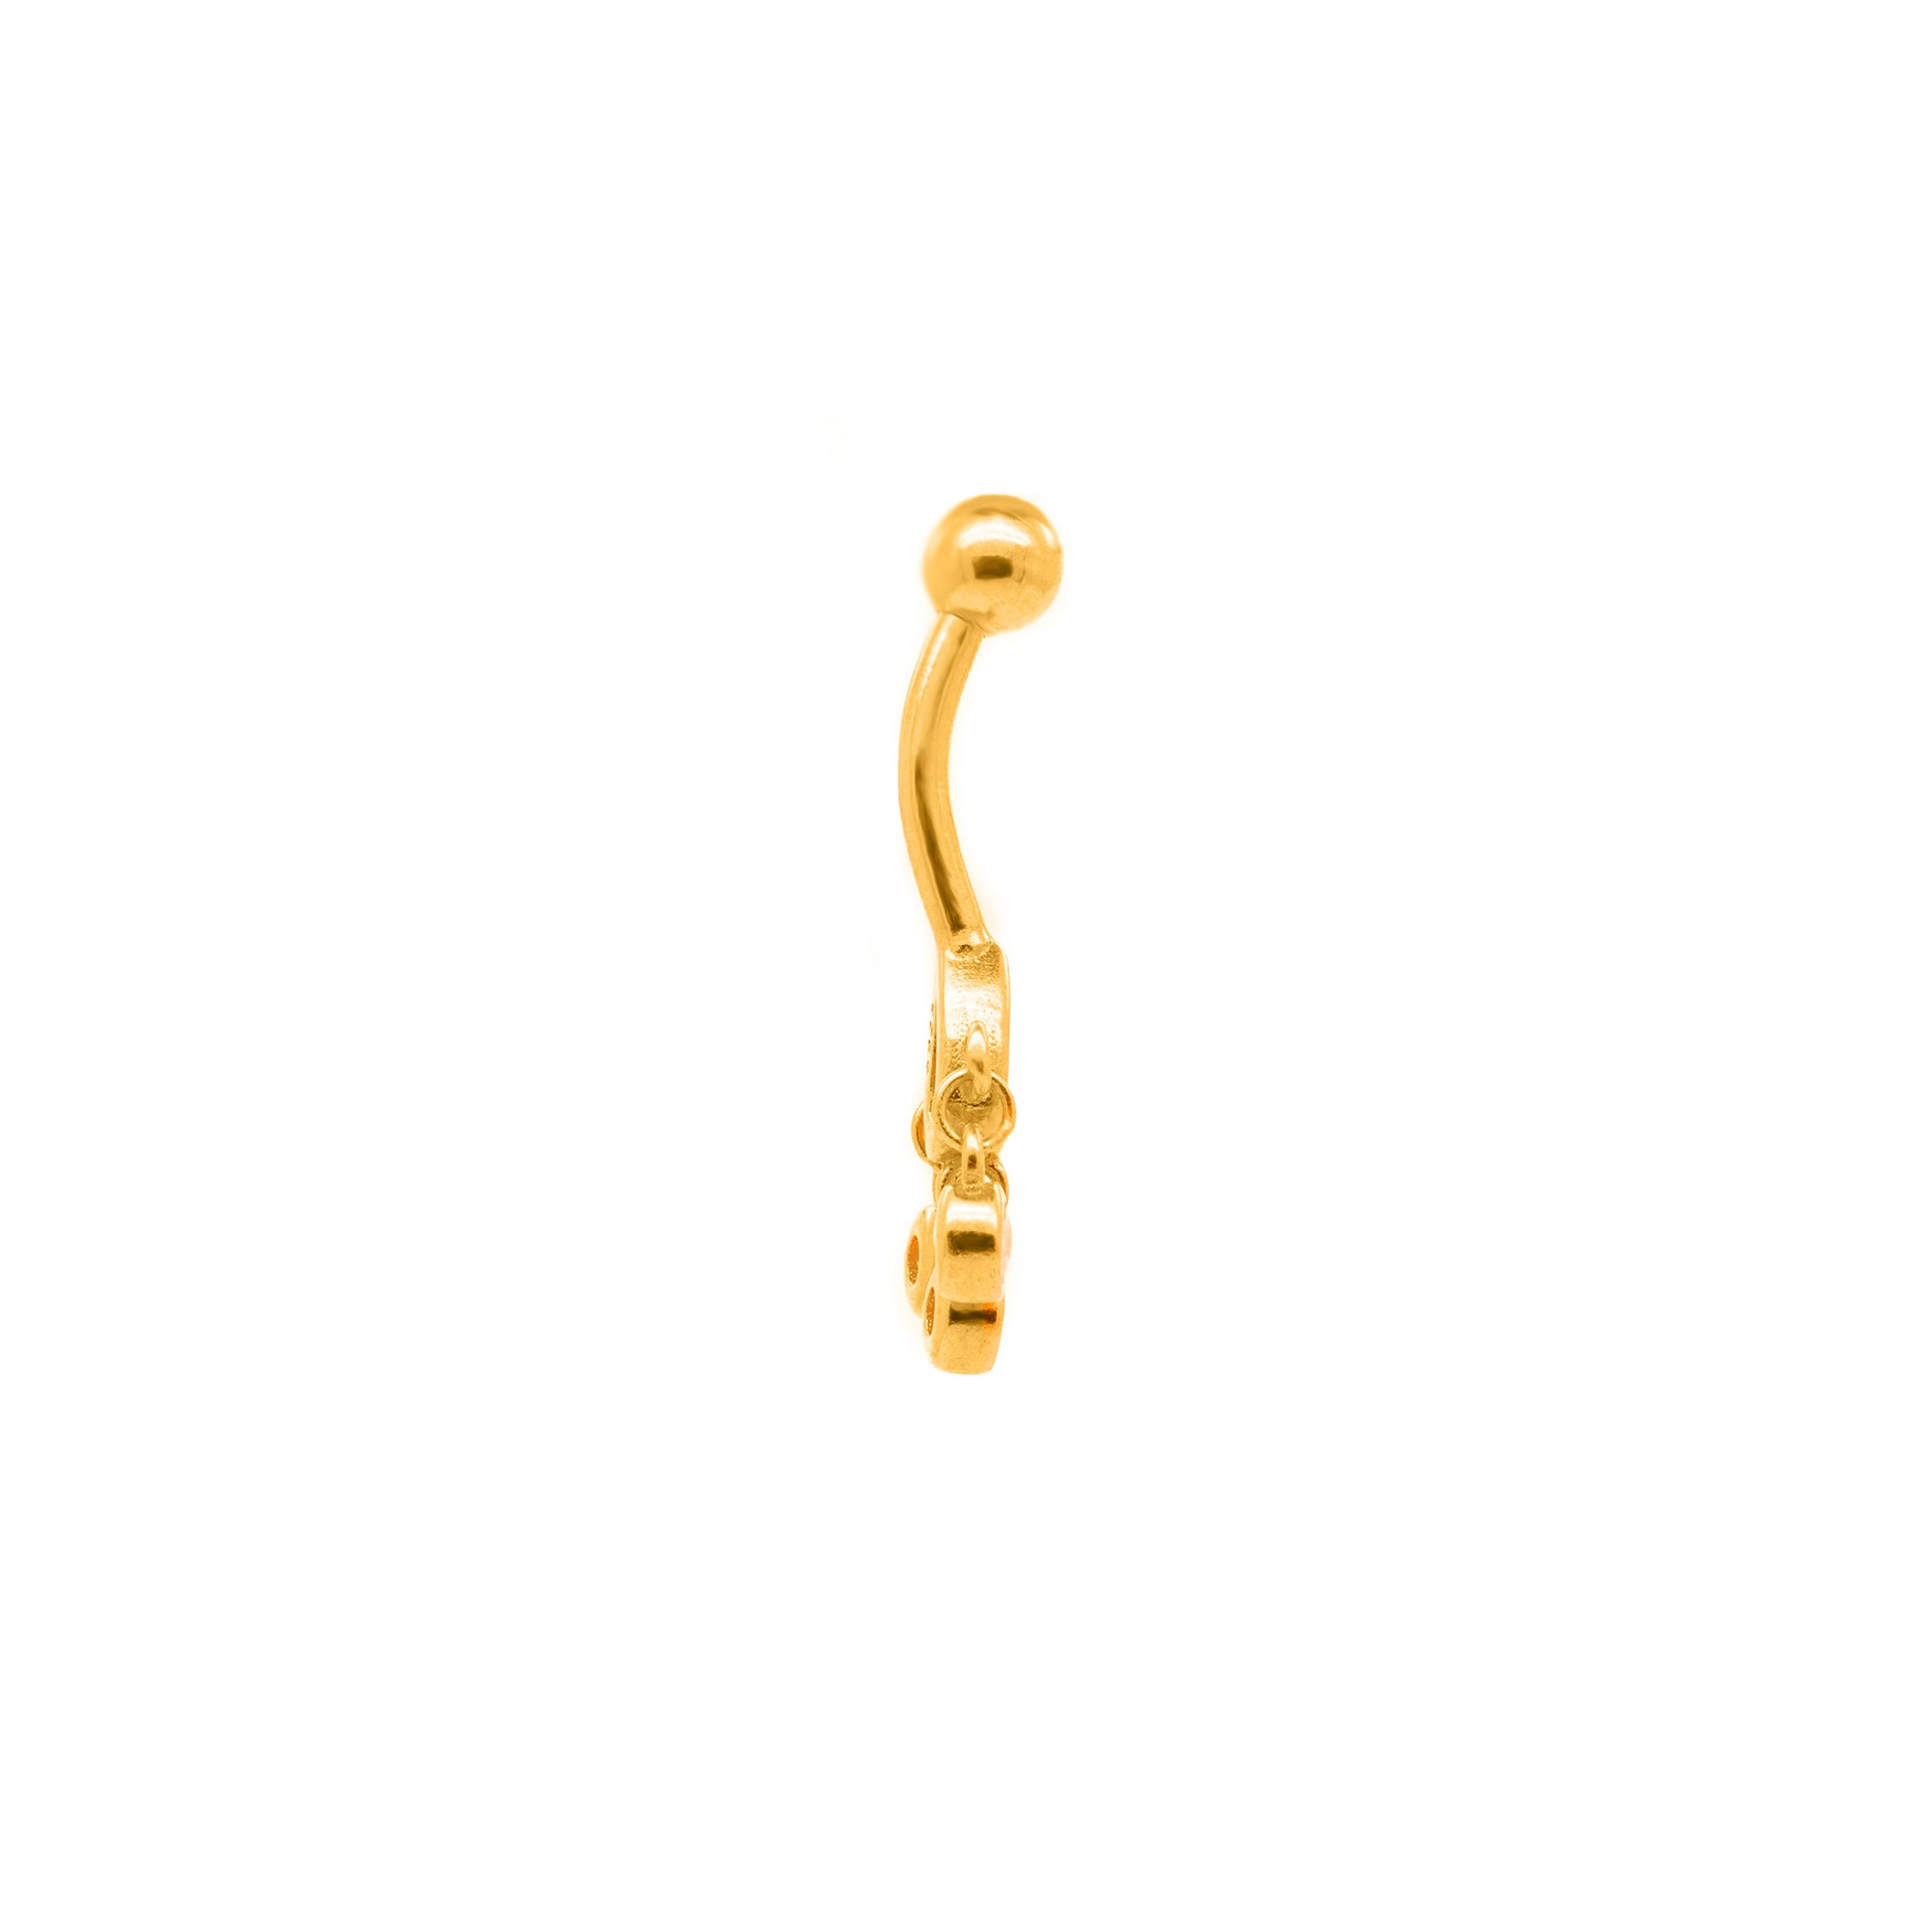 Vermeil | 925 Silver 24k Gold Coated Extra Flat Lower Chandelier Belly Ring with Charmes | 6mm 1/4" 8mm 5/16" 10mm 3/8" 12mm 1/2" 14mm 9/16" - Sturdy South